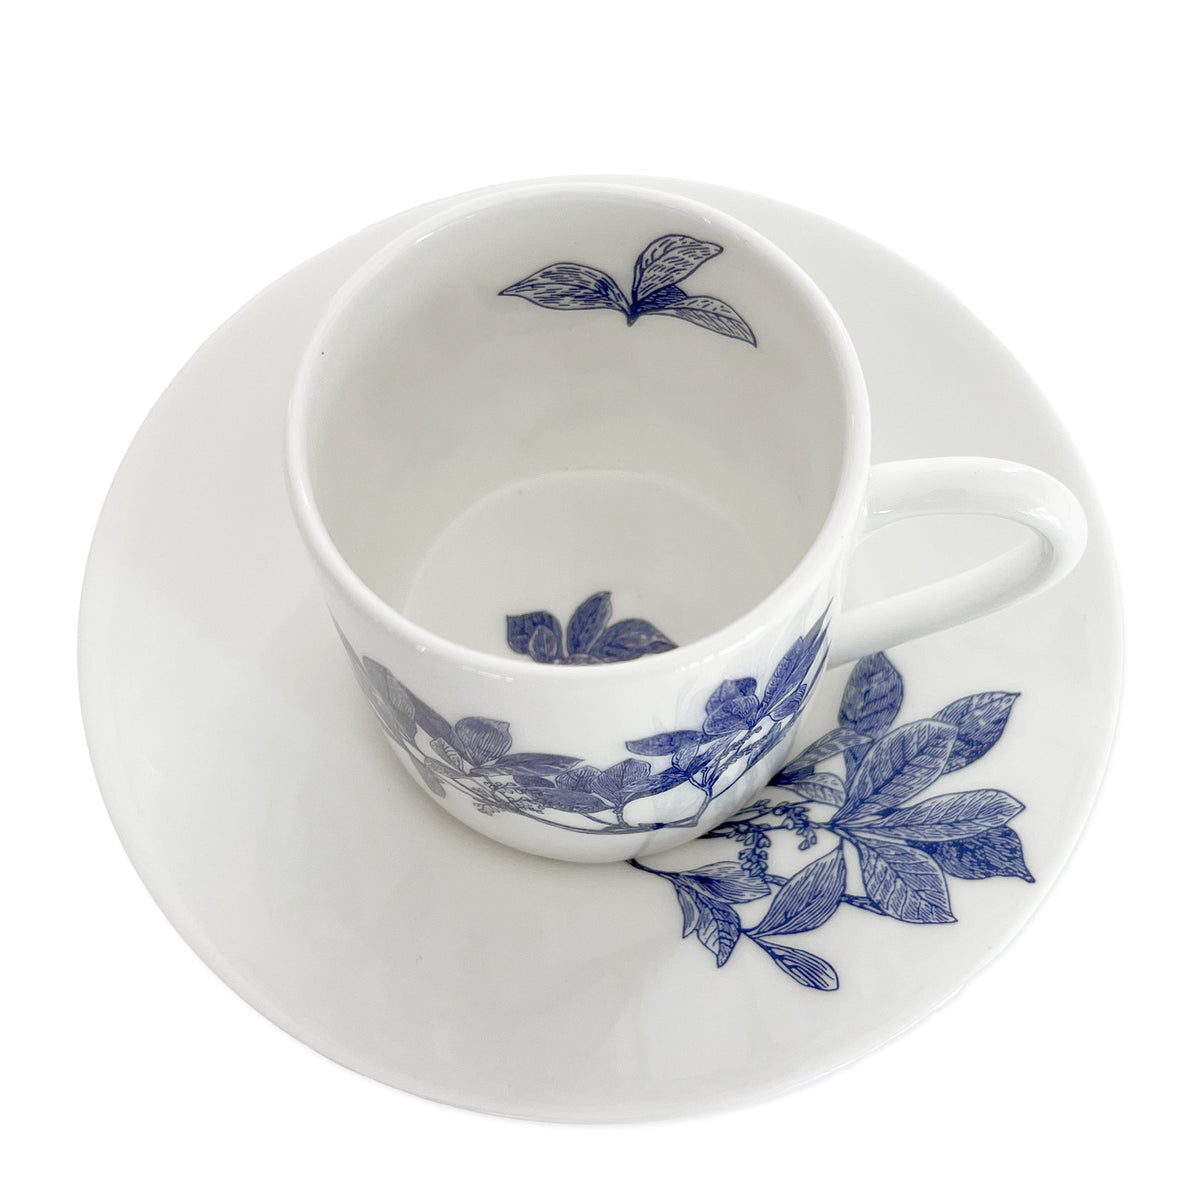 A set of Arbor Espresso Cups &amp; Saucers, Set of 2 by Caskata, featuring a white ceramic design with blue floral patterns, perfect for your Blue and White Dinnerware collection. The espresso cup, made of elegant Bone China, is placed gracefully on the matching saucer.